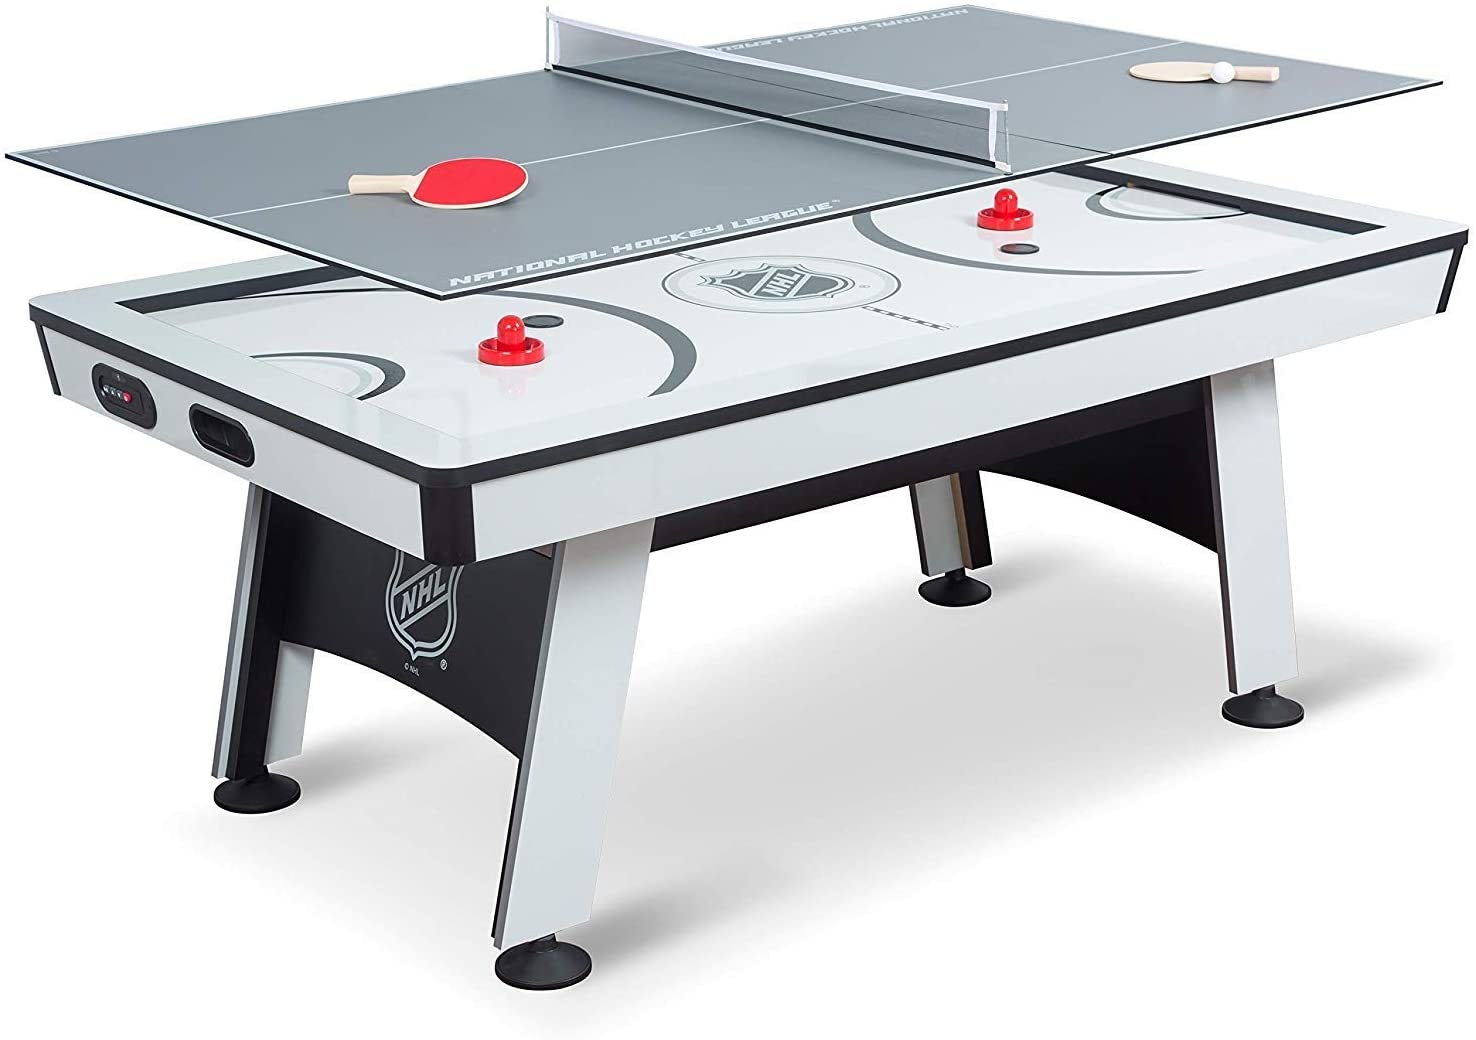 NHL Power Play Air Powered Hockey Table with Table Tennis Top